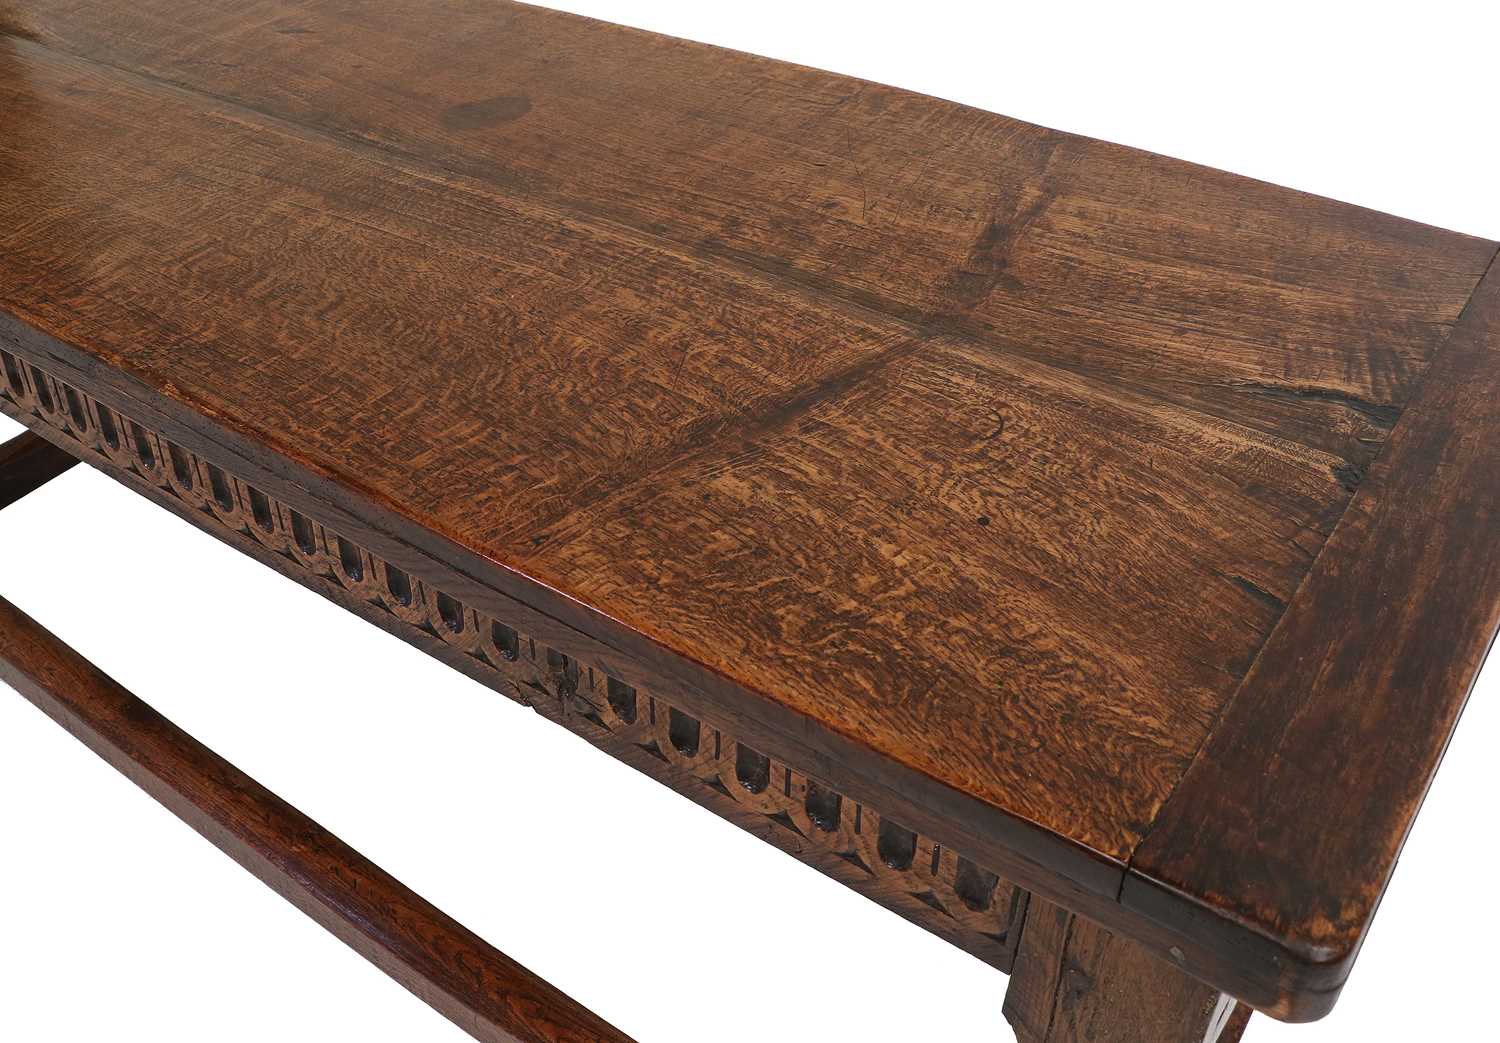 An Early 18th Century Joined Oak Refectory Dining Table, of two-plank construction with cleated ends - Image 4 of 4